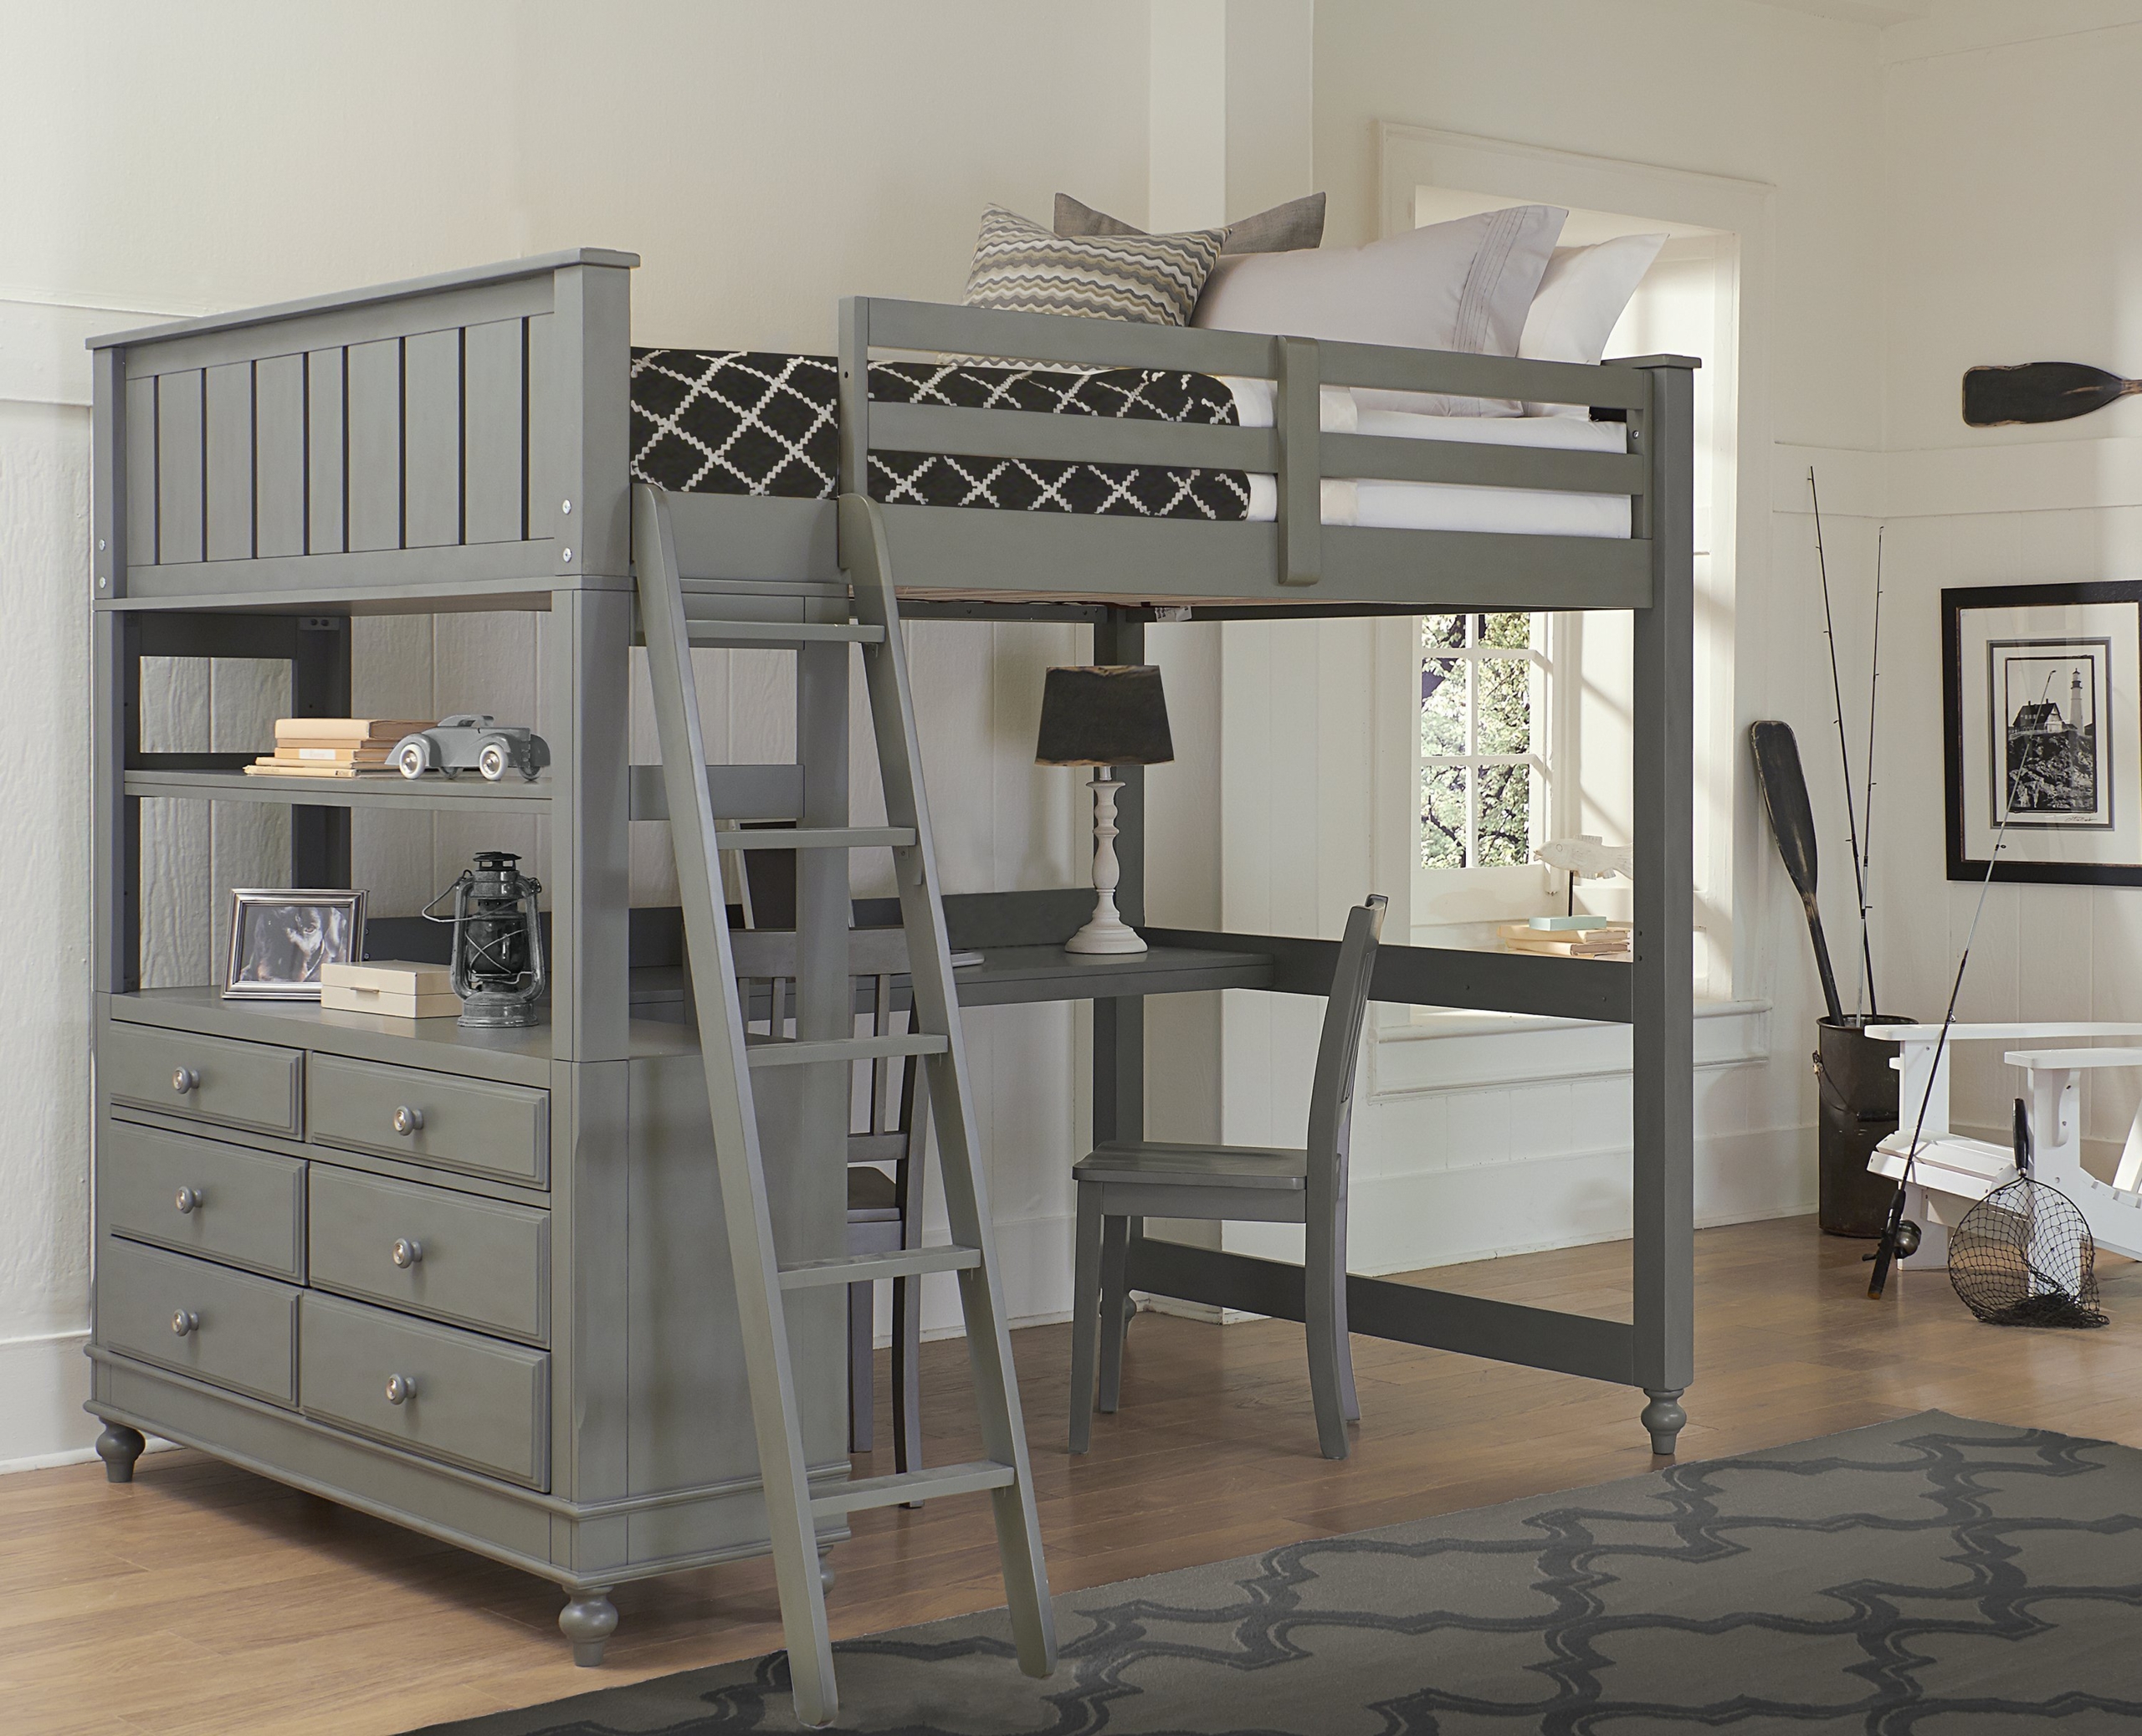 Bunk Beds With Dressers Visualhunt, Childs Bunk Bed With Desk